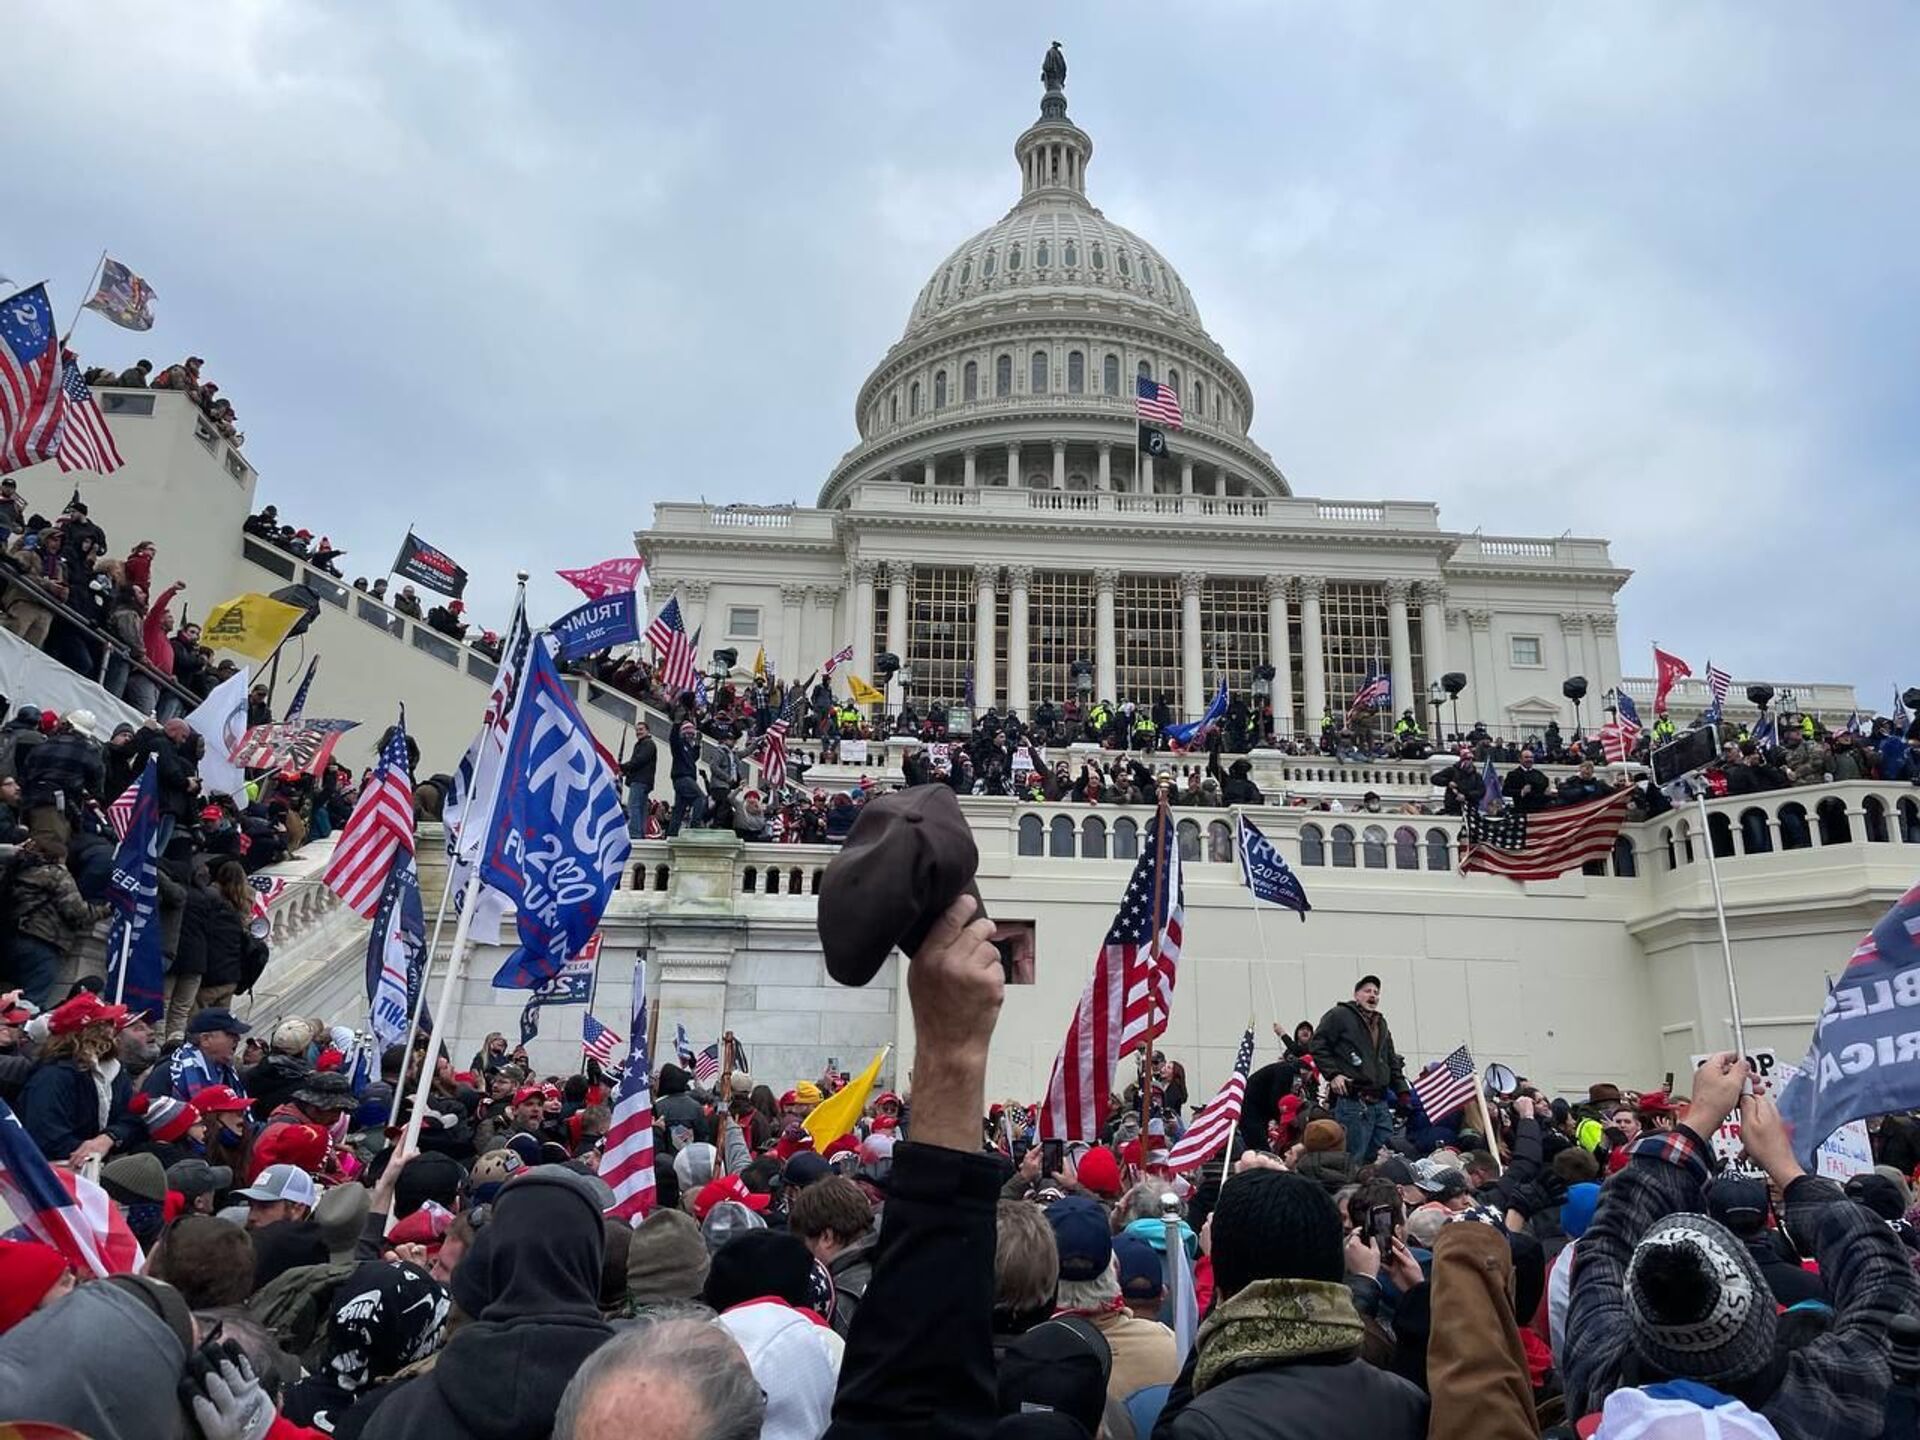 Demonstrators protest outside US Capitol Building in Washington to contest the certification of the 2020 presidential election results by the US Congress, 6 January 2021 - Sputnik International, 1920, 07.09.2021